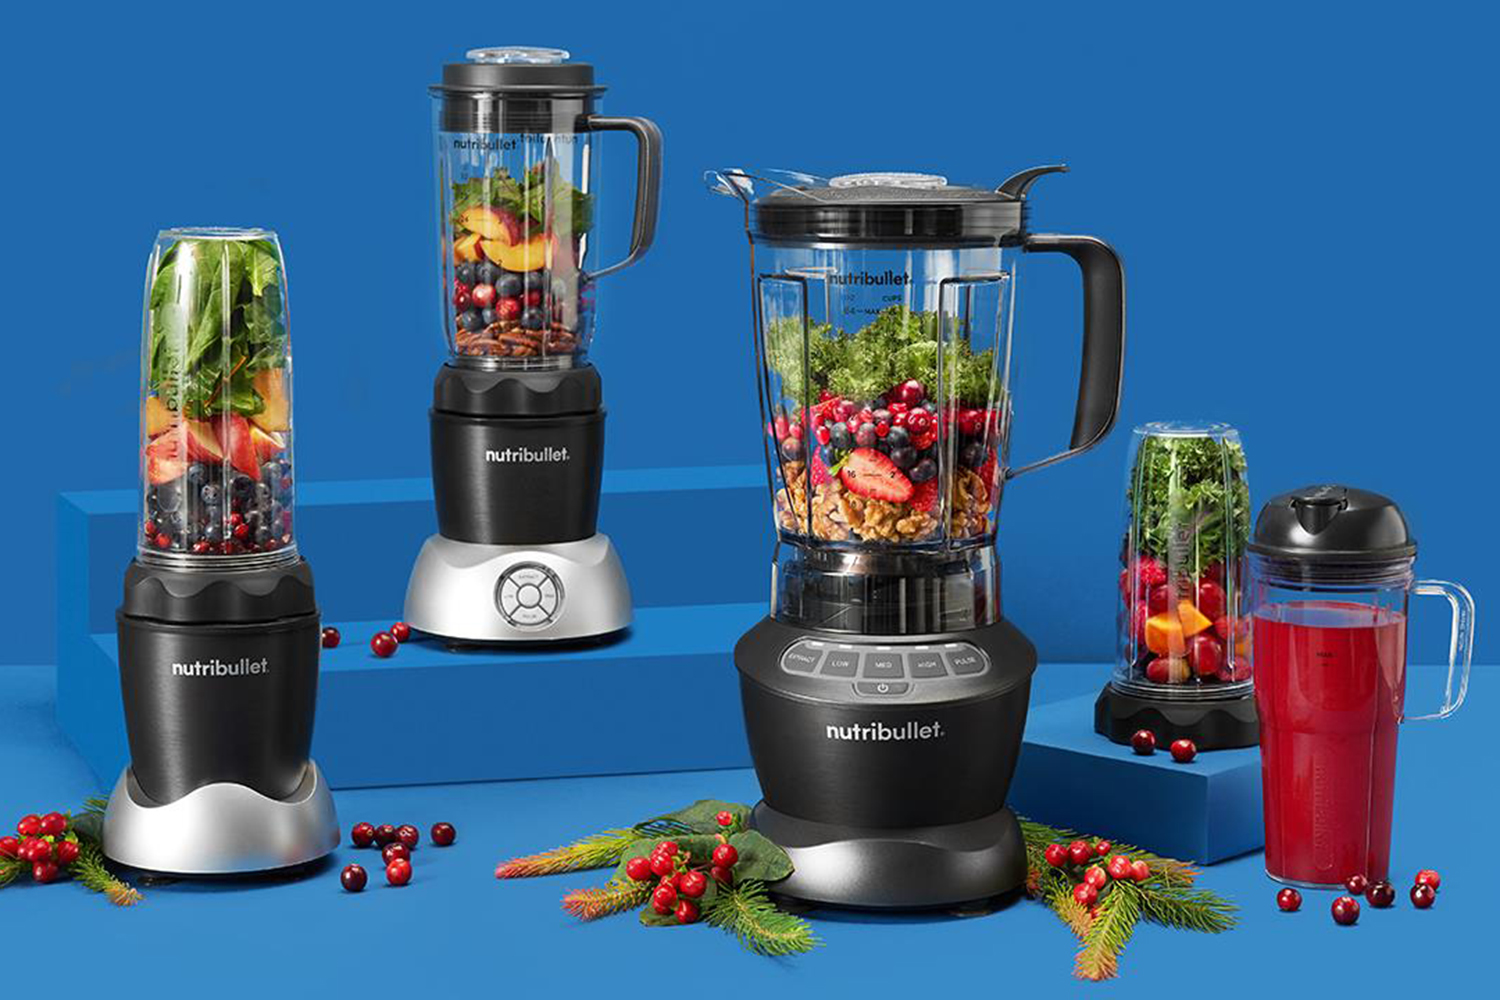 Magic Bullet personal blenders on sale for just $30 at